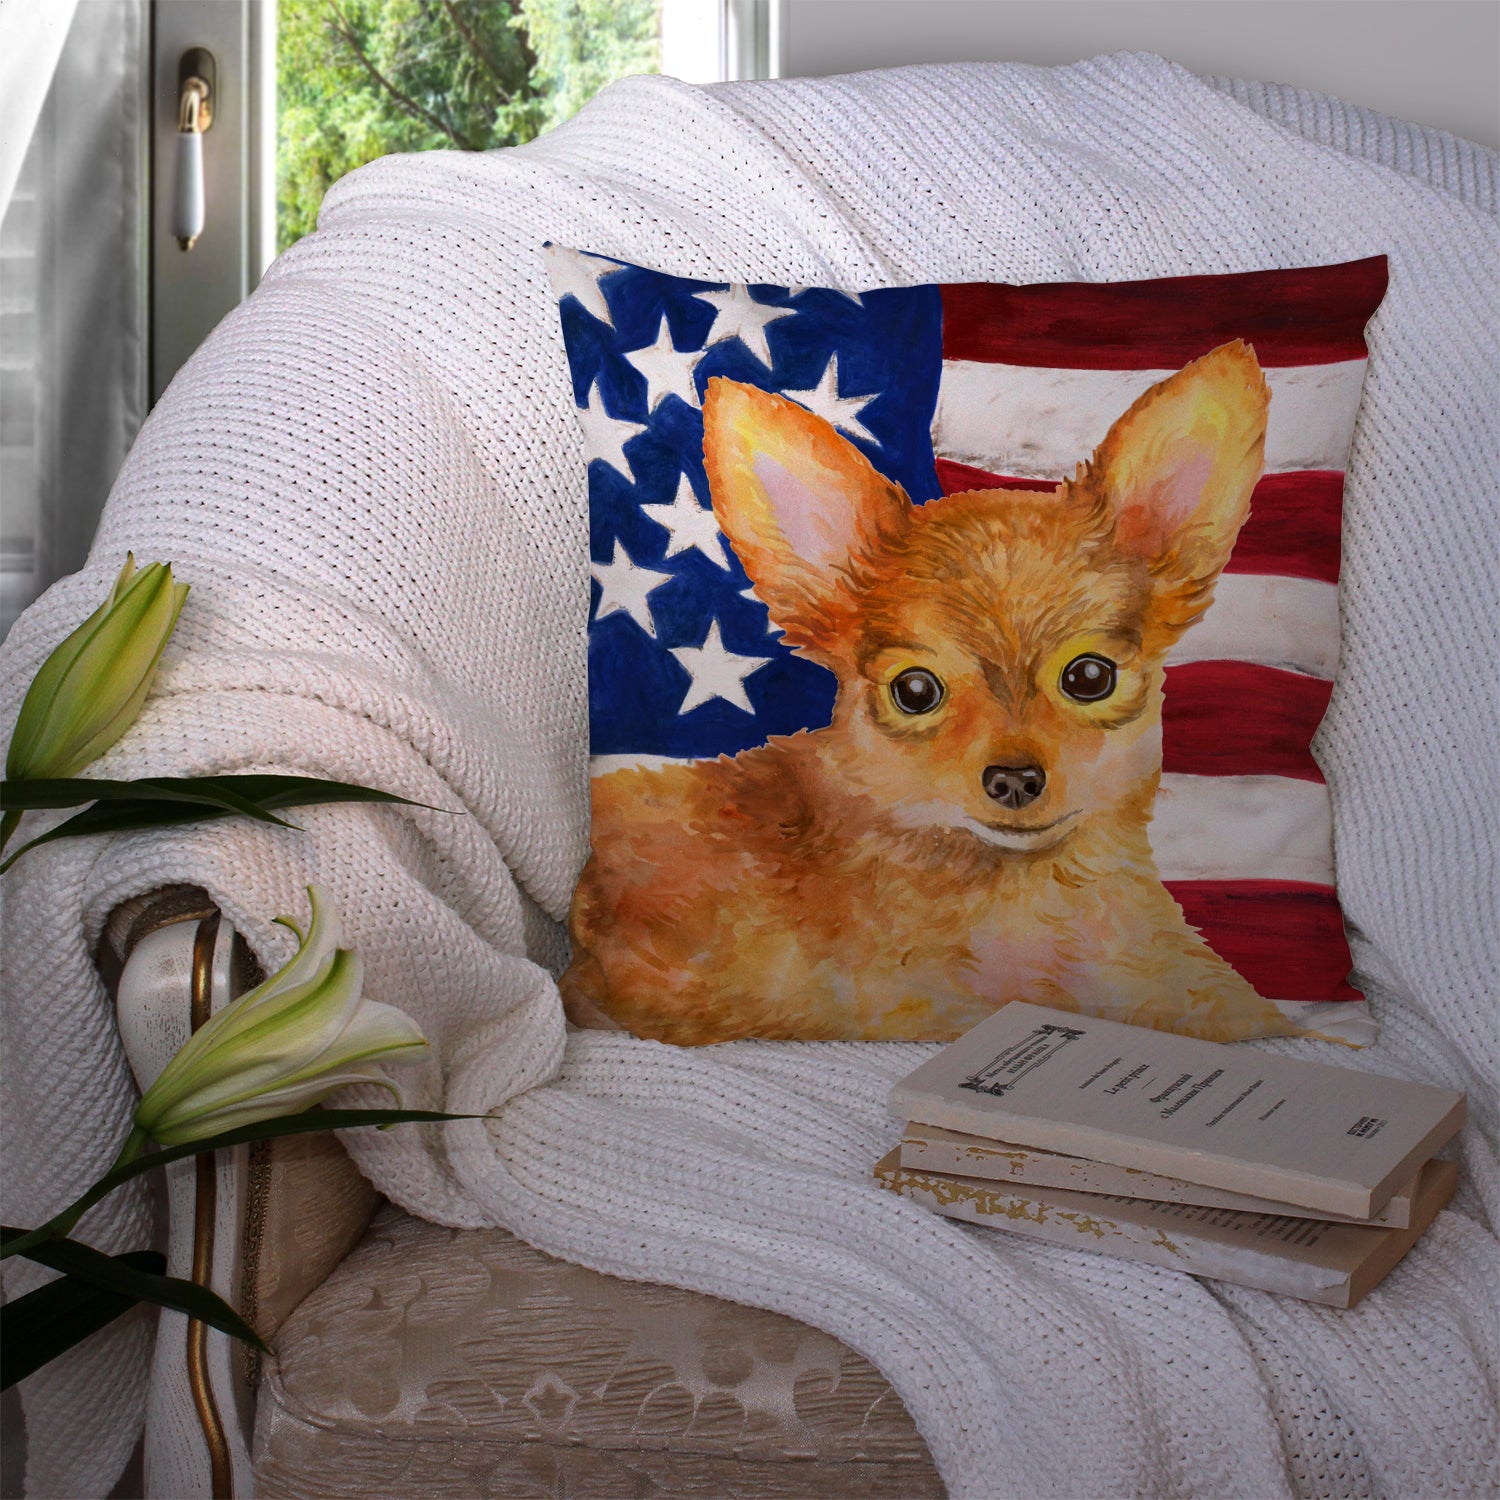 Toy Terrier Patriotic Fabric Decorative Pillow BB9722PW1414 - the-store.com